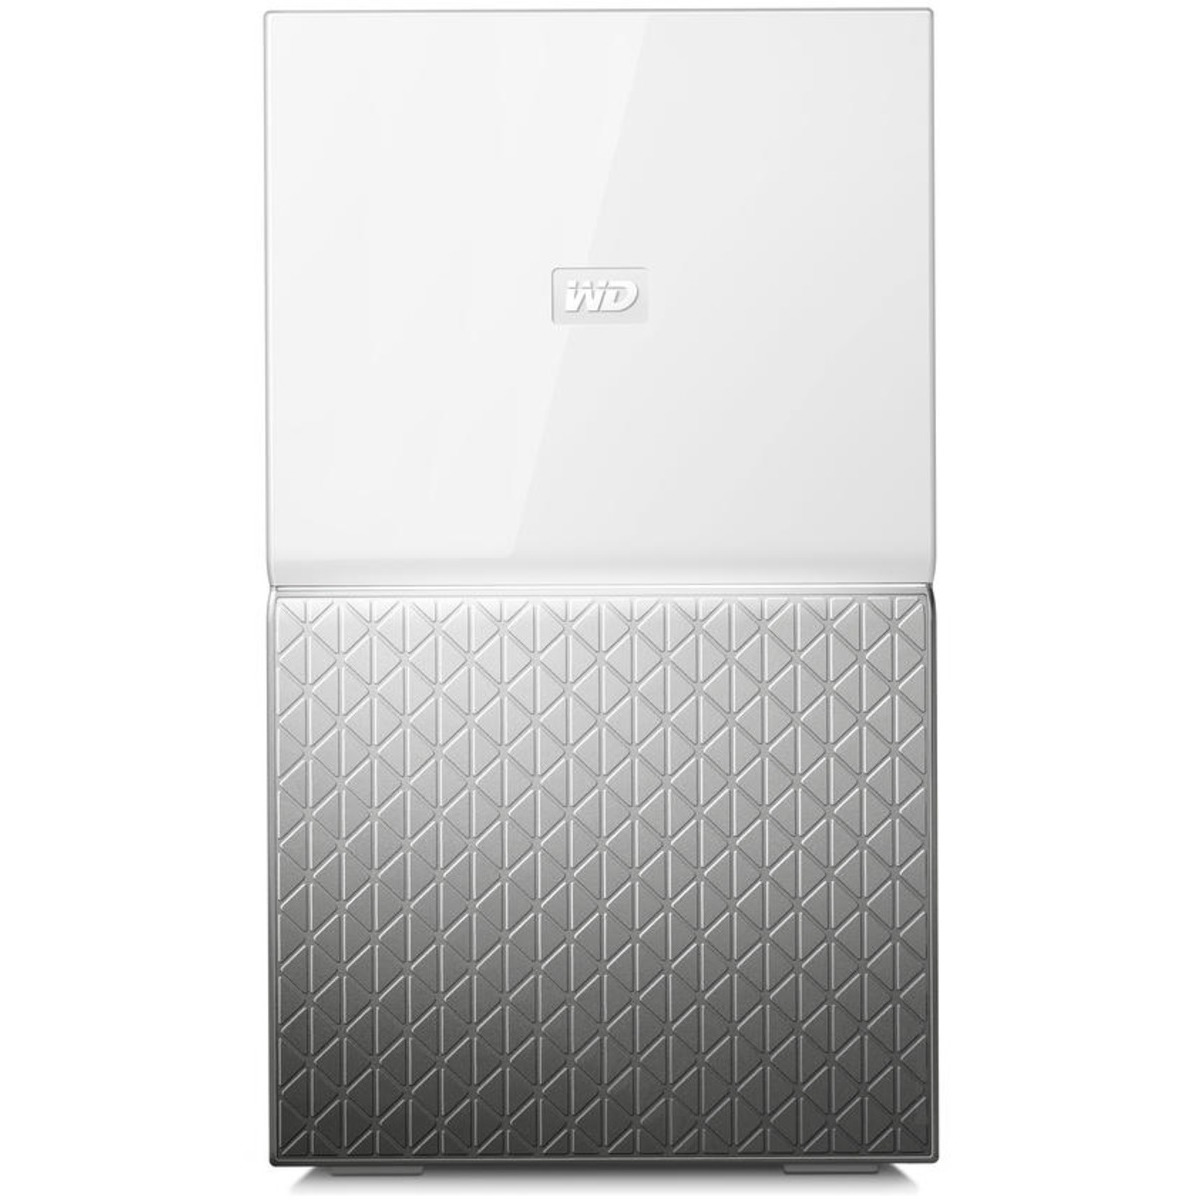 Western Digital My Cloud Home Duo 20tb 2-Bay Desktop Personal / Basic Home / Small Office DAS - Direct Attached Storage Device 1x20tb Western Digital Red Pro WD201KFGX 3.5 7200rpm SATA 6Gb/s HDD NAS Class Drives Installed - Burn-In Tested My Cloud Home Duo